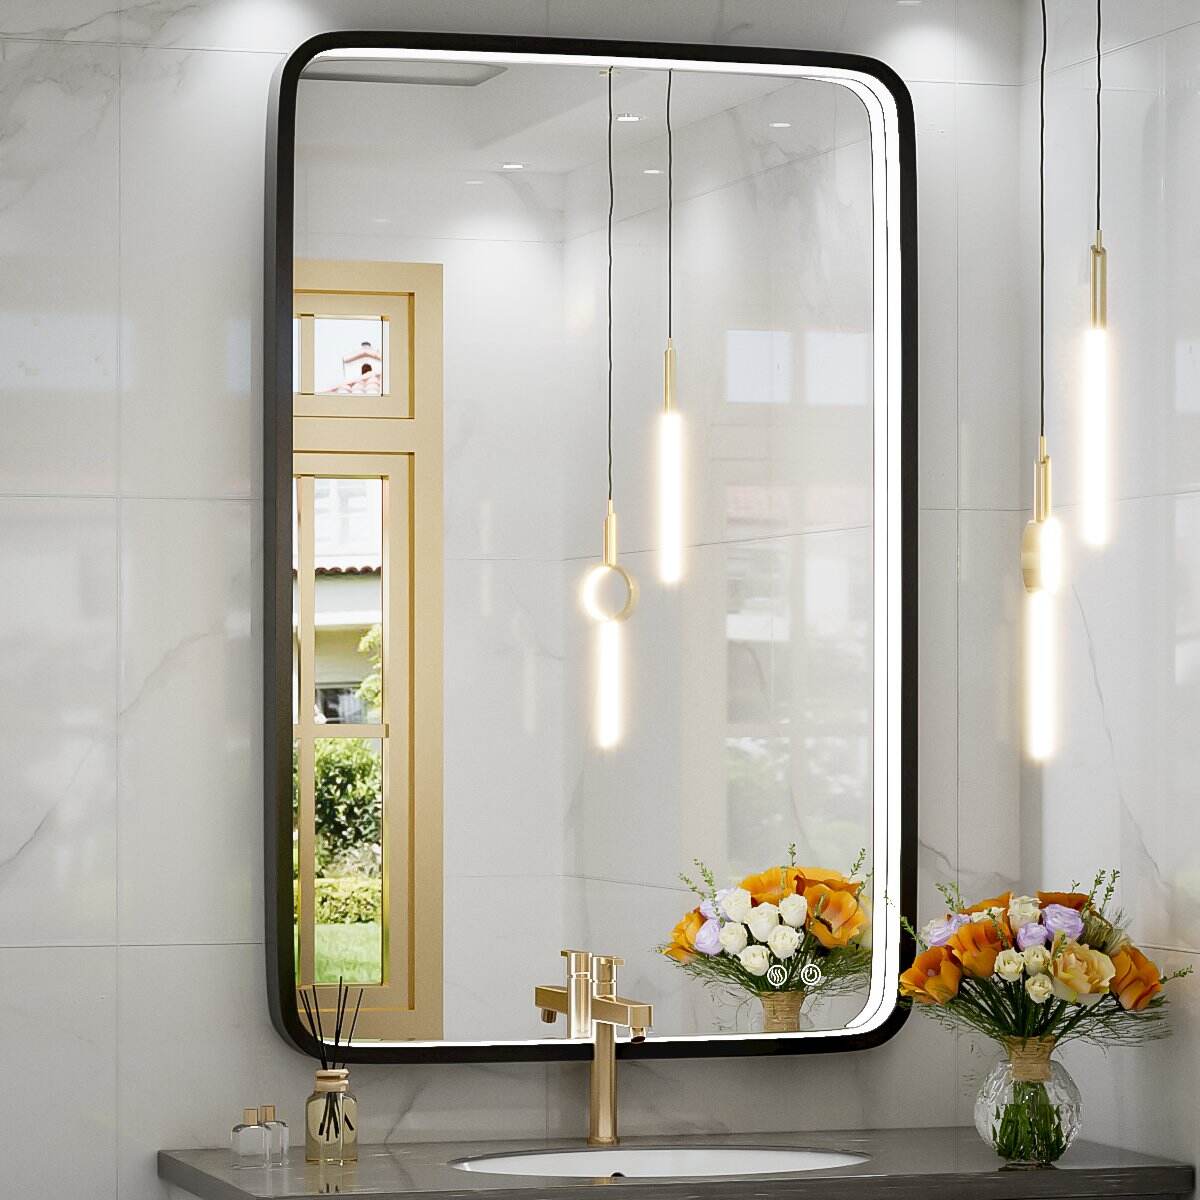 JJGullit bathroom mirror supplier  24x36 Inch LED Bathroom Mirror with Lights, Black Metal Framed Lighted Vanity Mirror, French Cleats Wall Mounted Anti Fog Dimmable LED Mirror Makeup for Bedroom